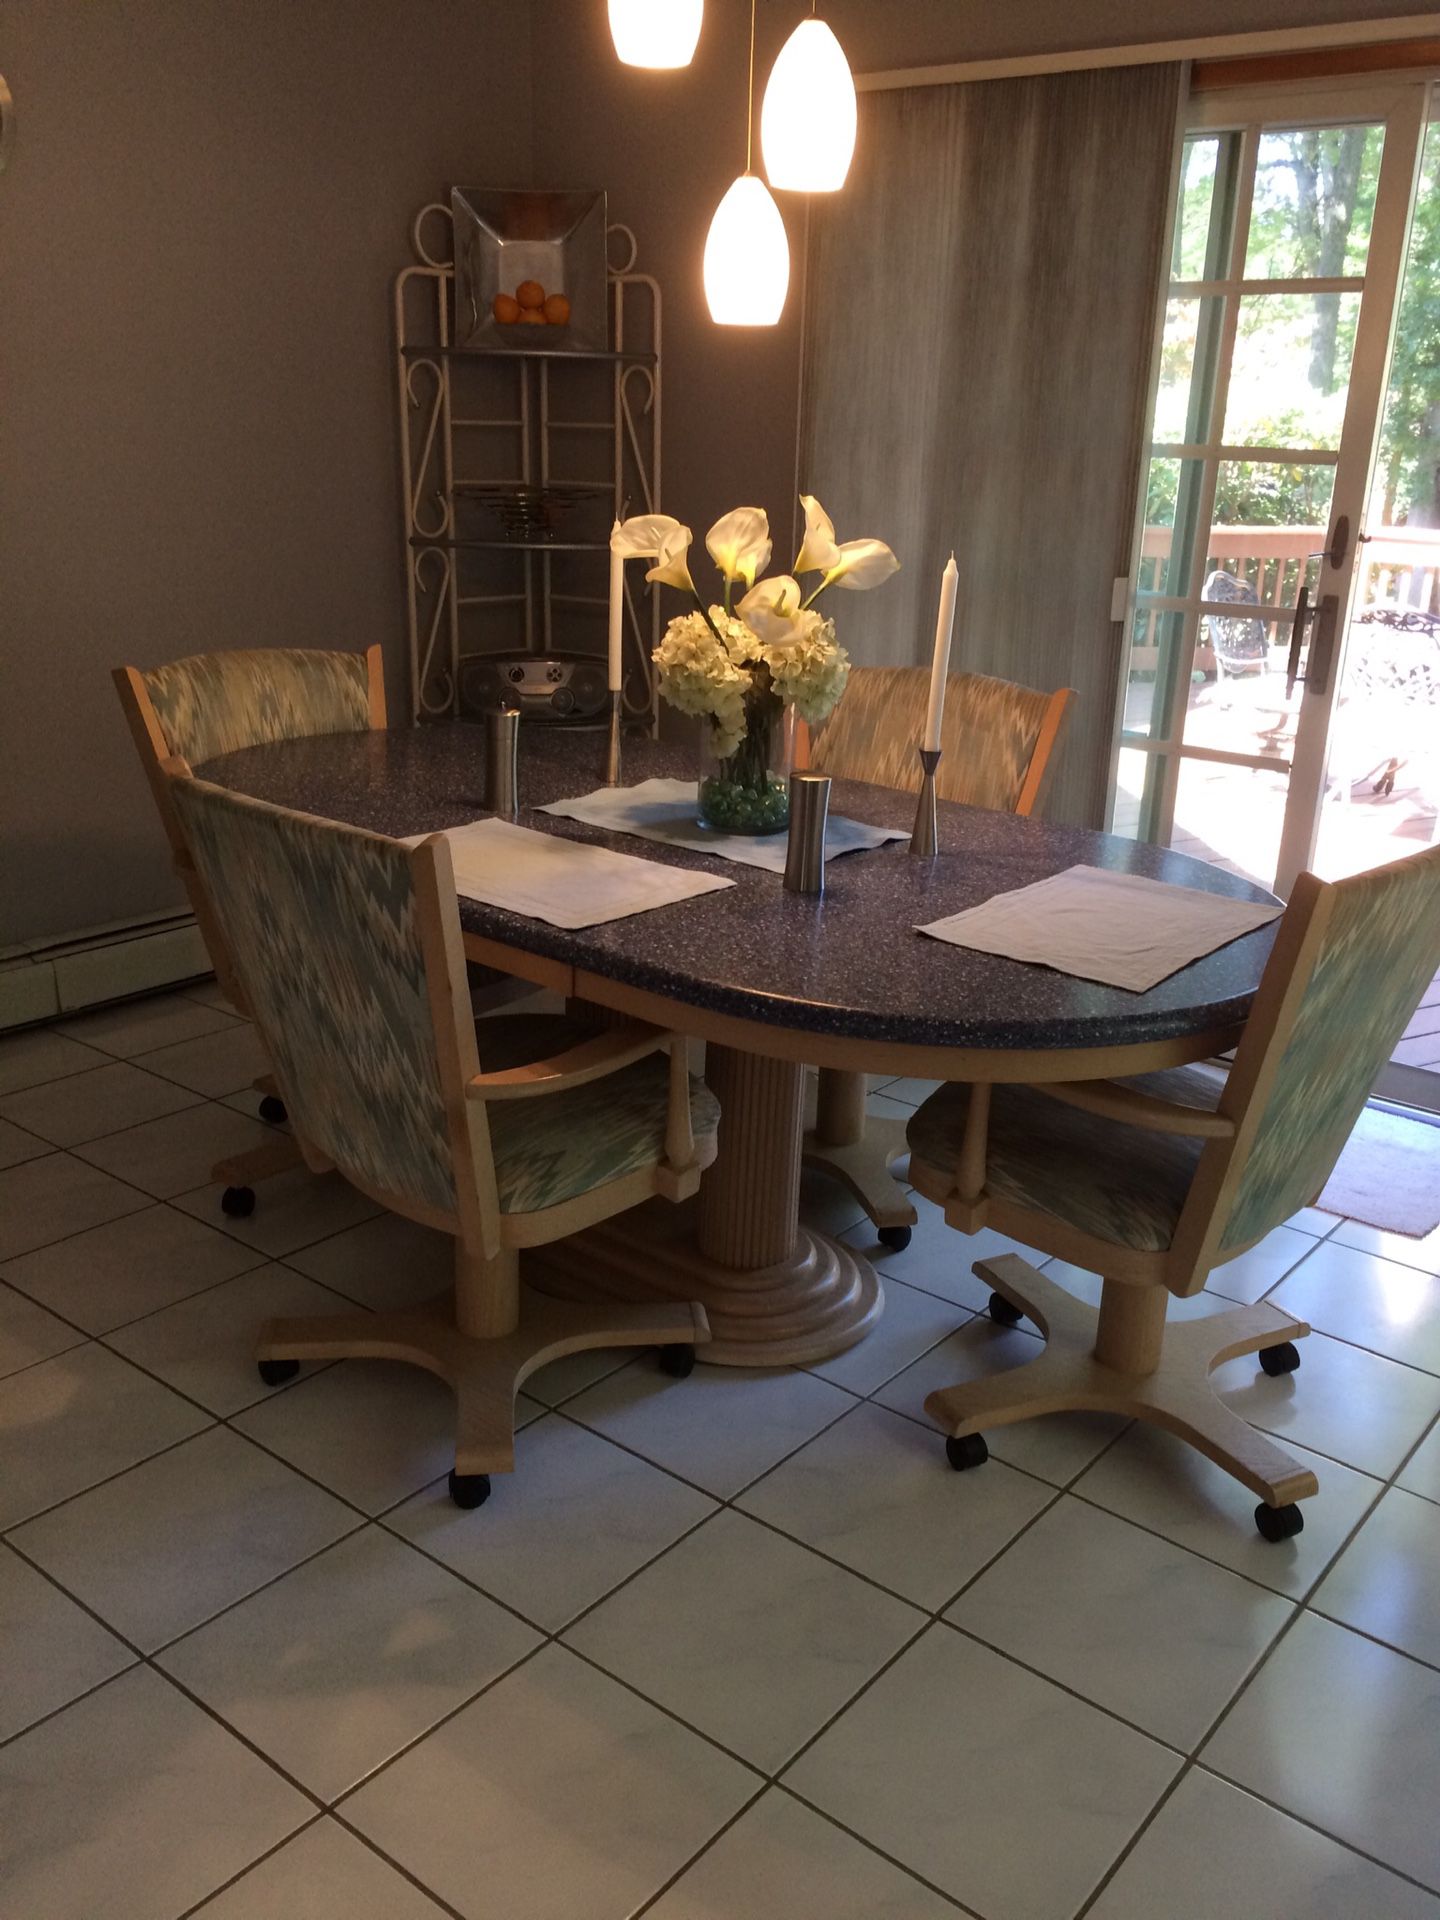 Kitchen set with 4 chairs